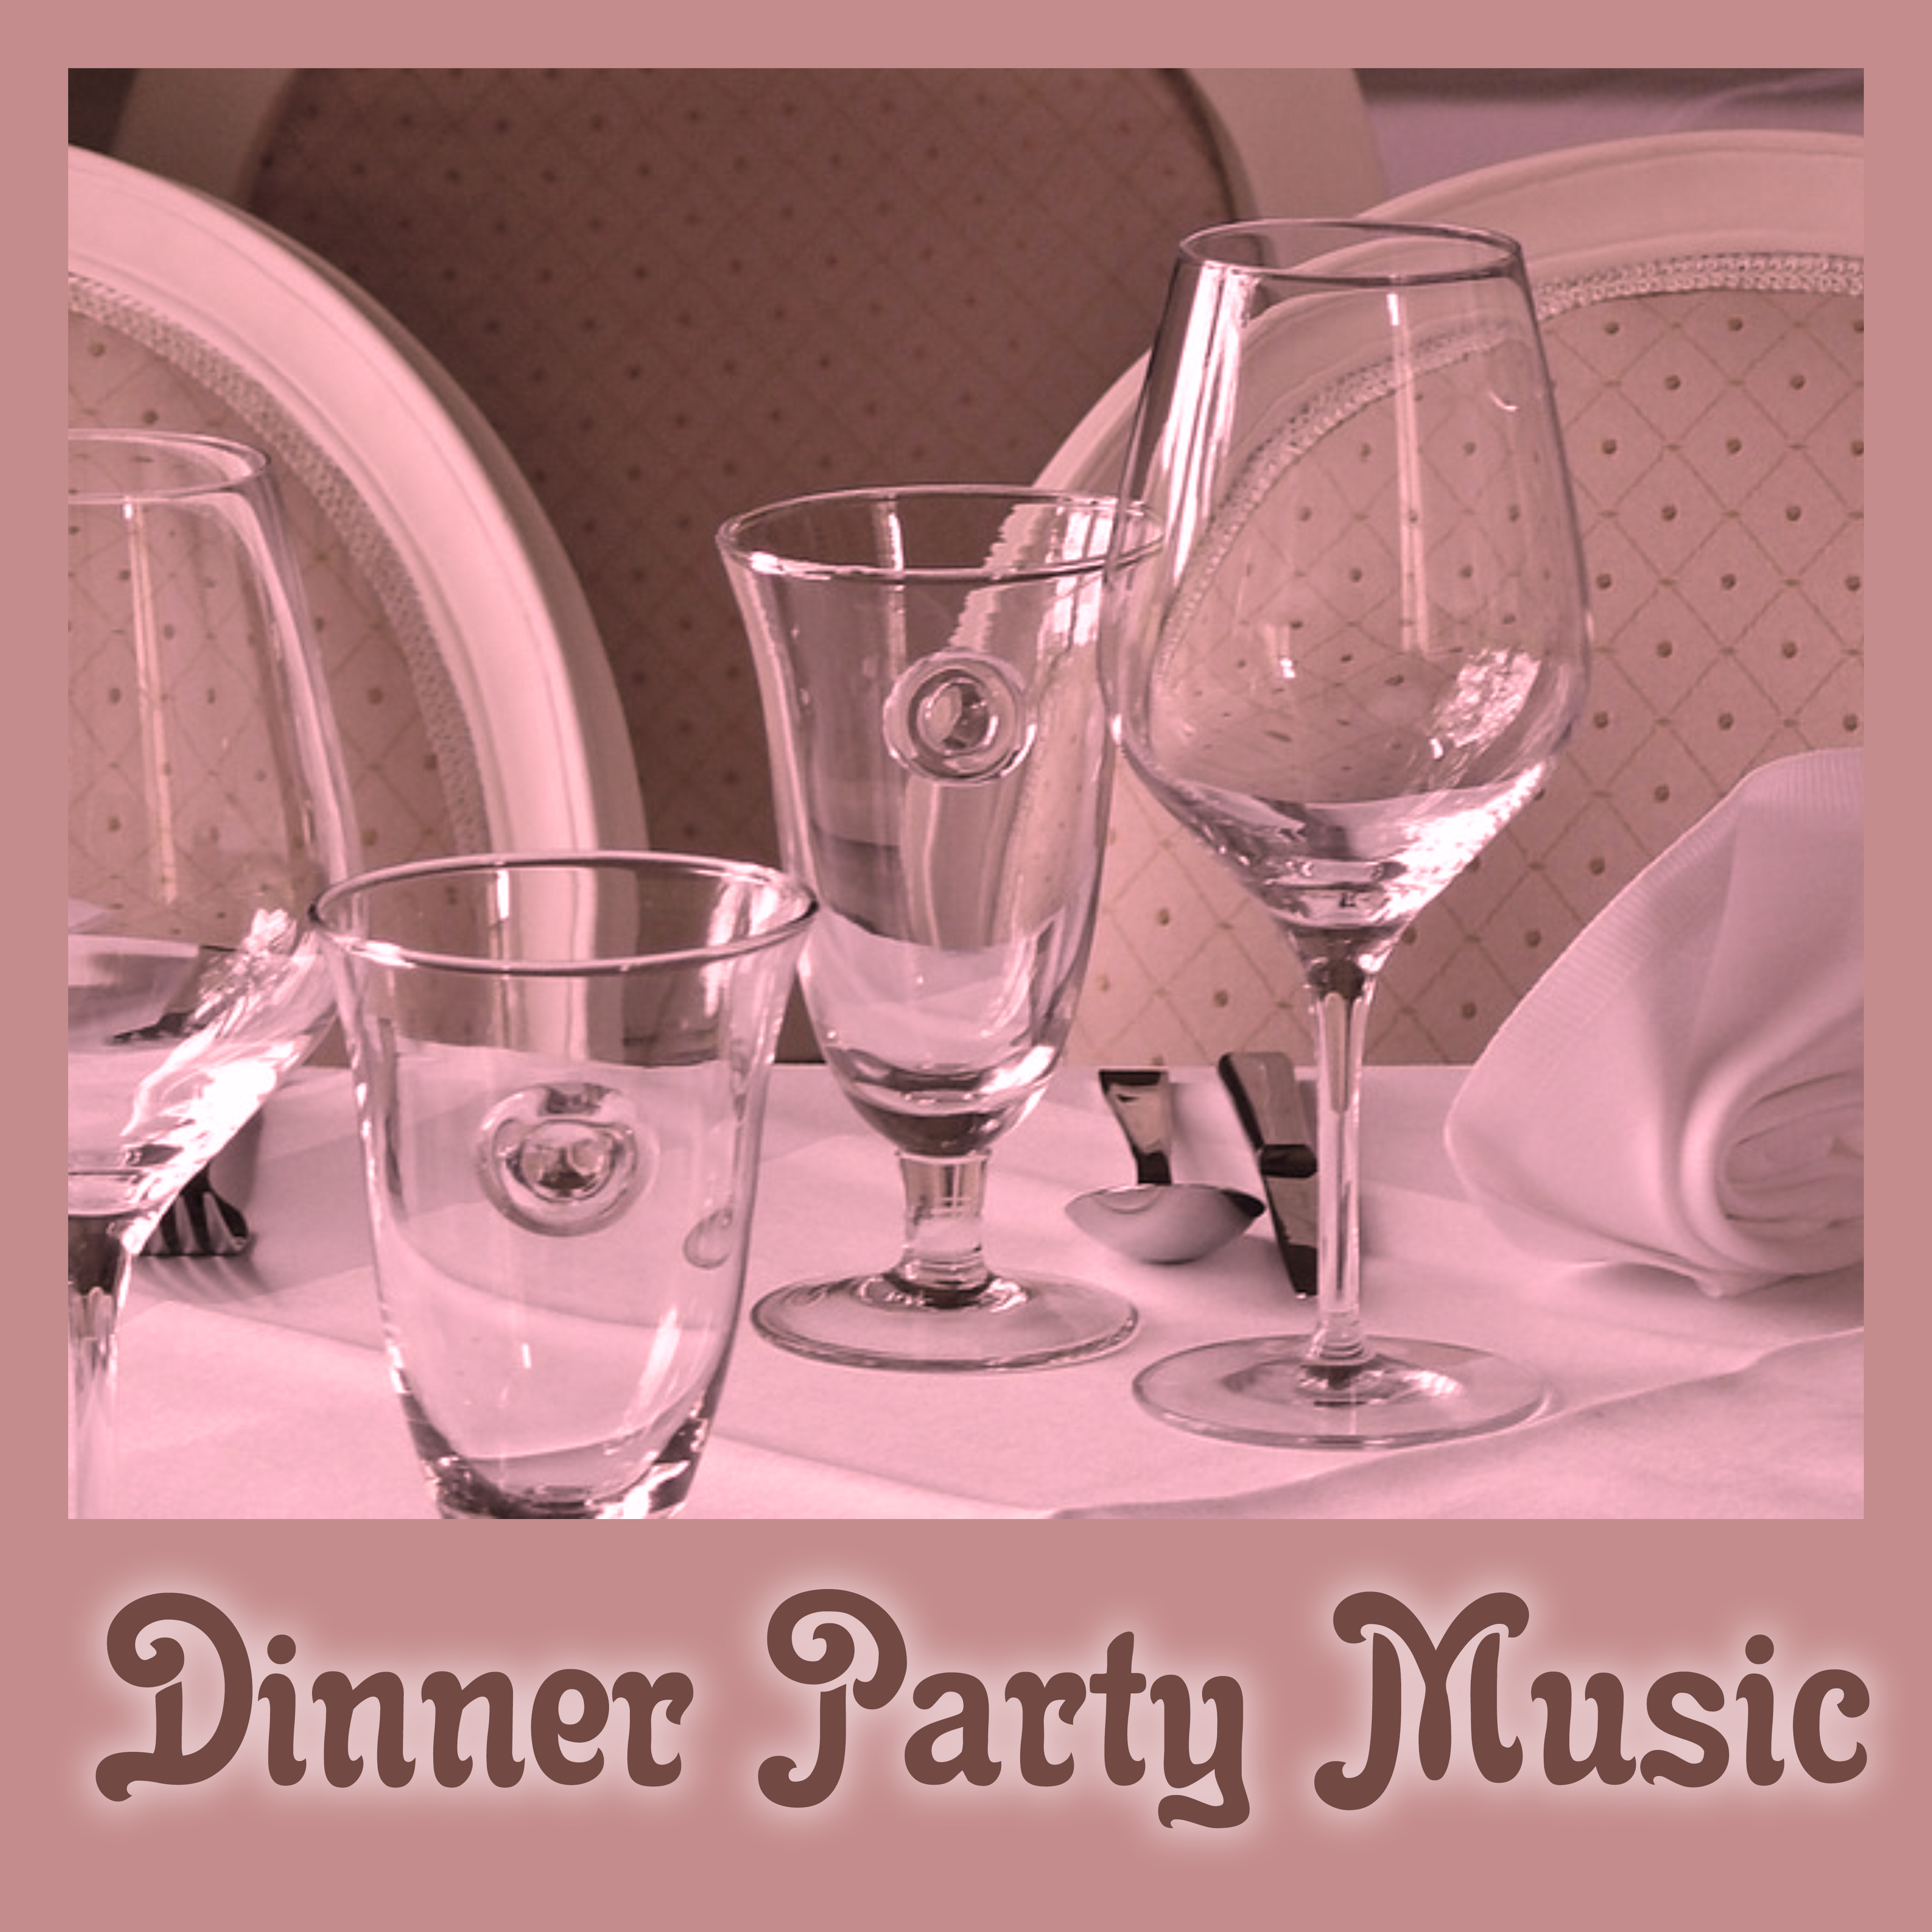 Dinner Party Music – Melow Piano Jazz for Restaurant & Cafe, Jazz Club & Bar, Ambient Instrumental Piano, Instrumental Jazz, Background Music